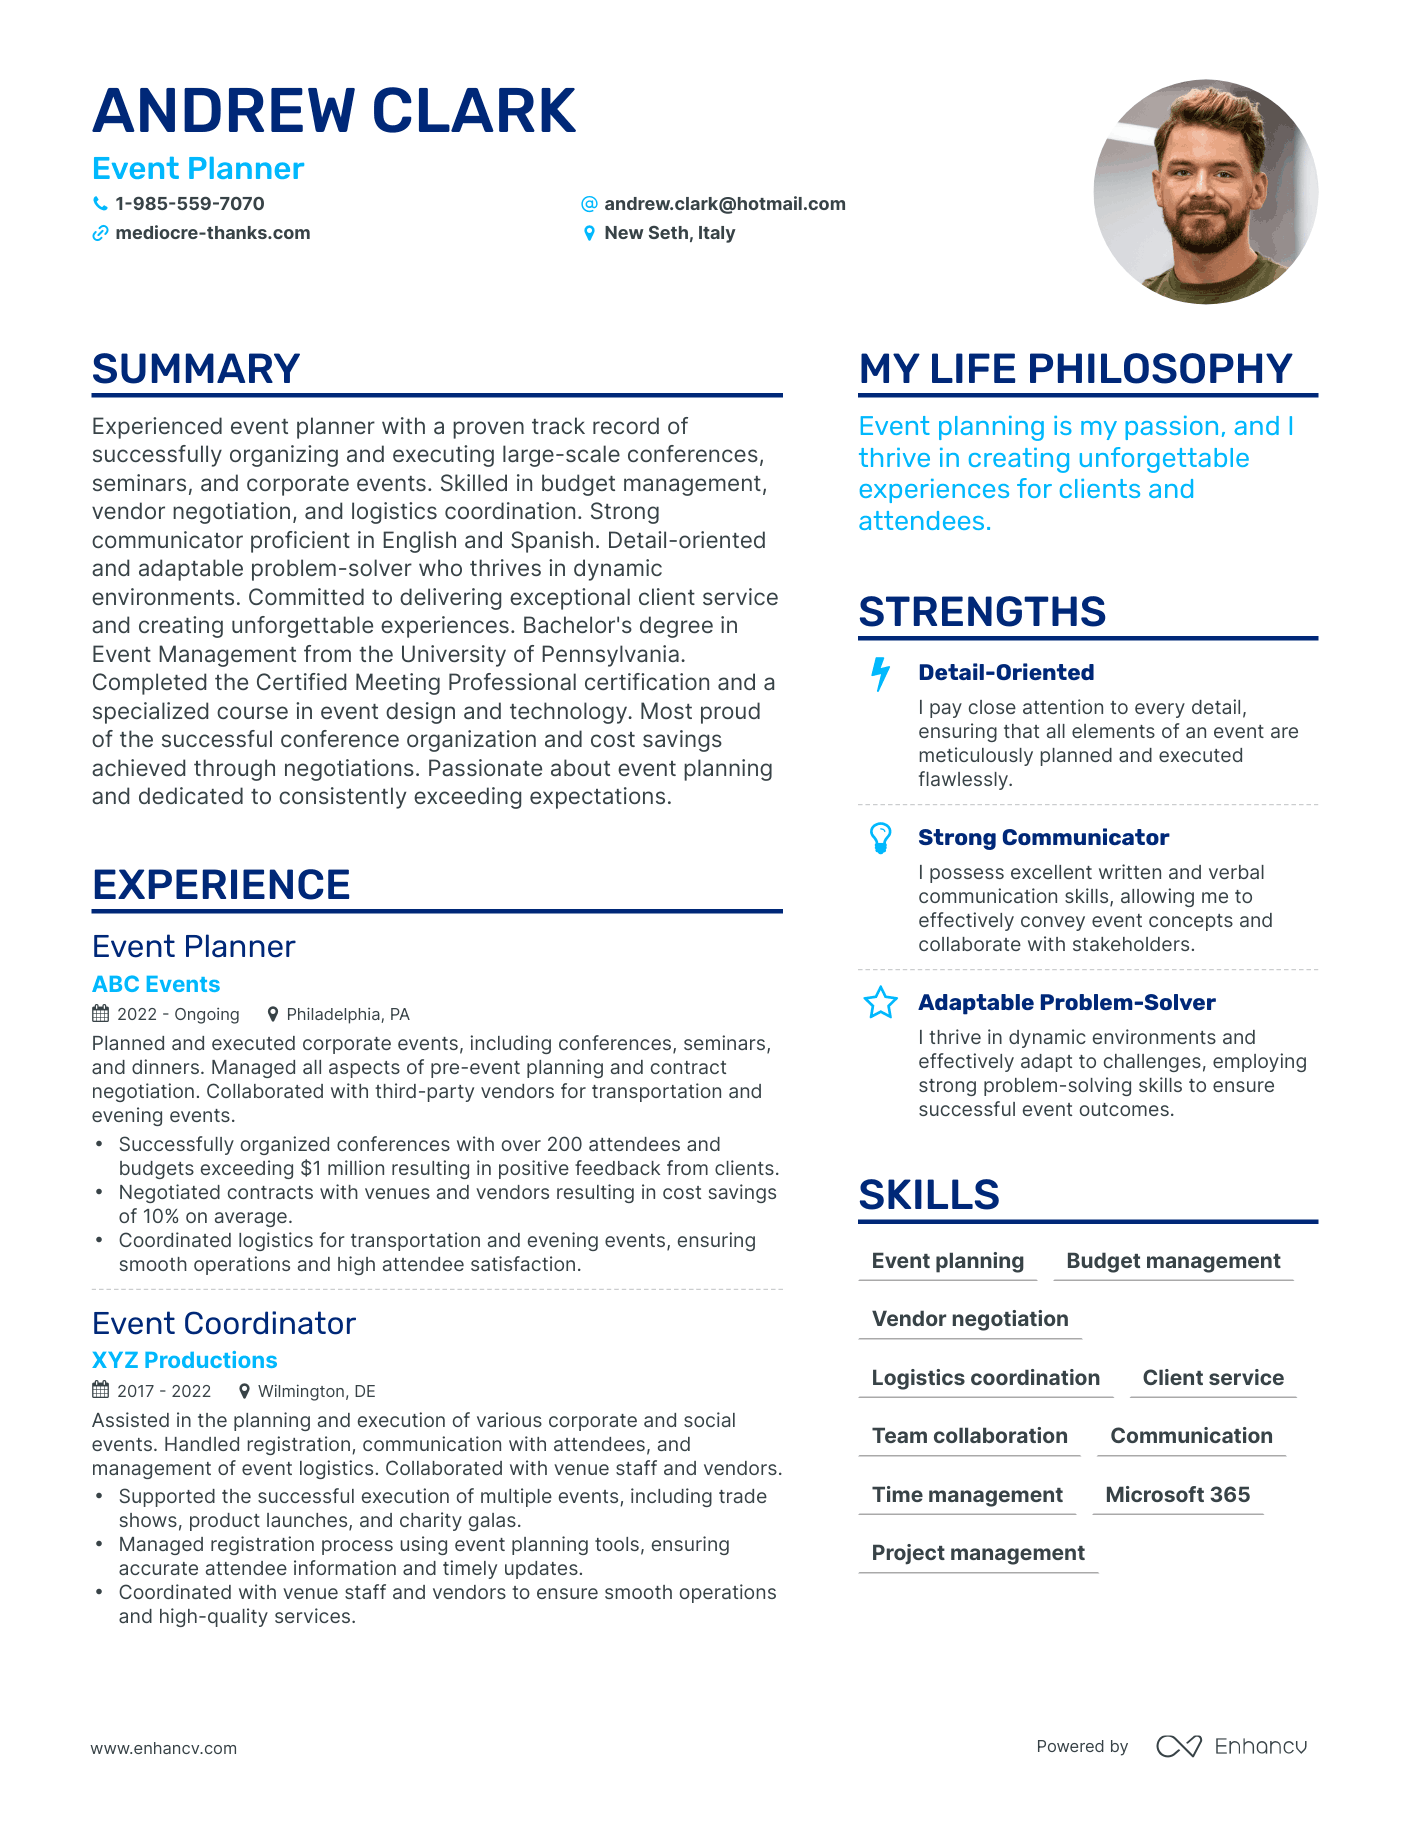 Event Planner resume example